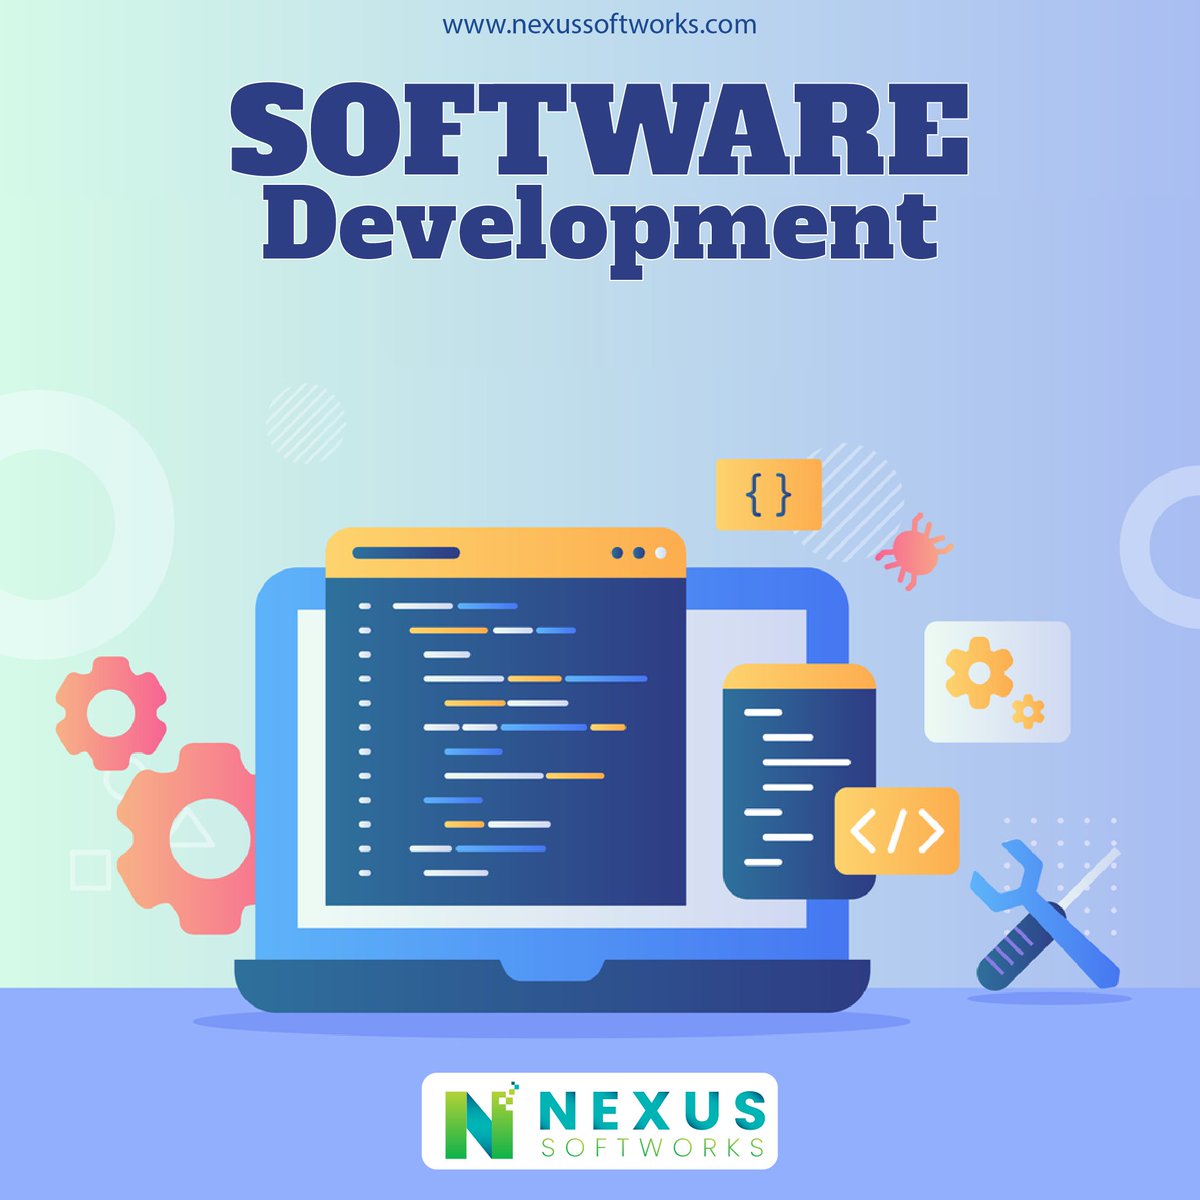 Empowering businesses with innovative software solutions. From concept to execution, we've got you covered.
.
.
#nexussoftworks #SoftwareDevelopment #TechSolutions #Coding #codinglife #dev 🎯🖥👨‍💻